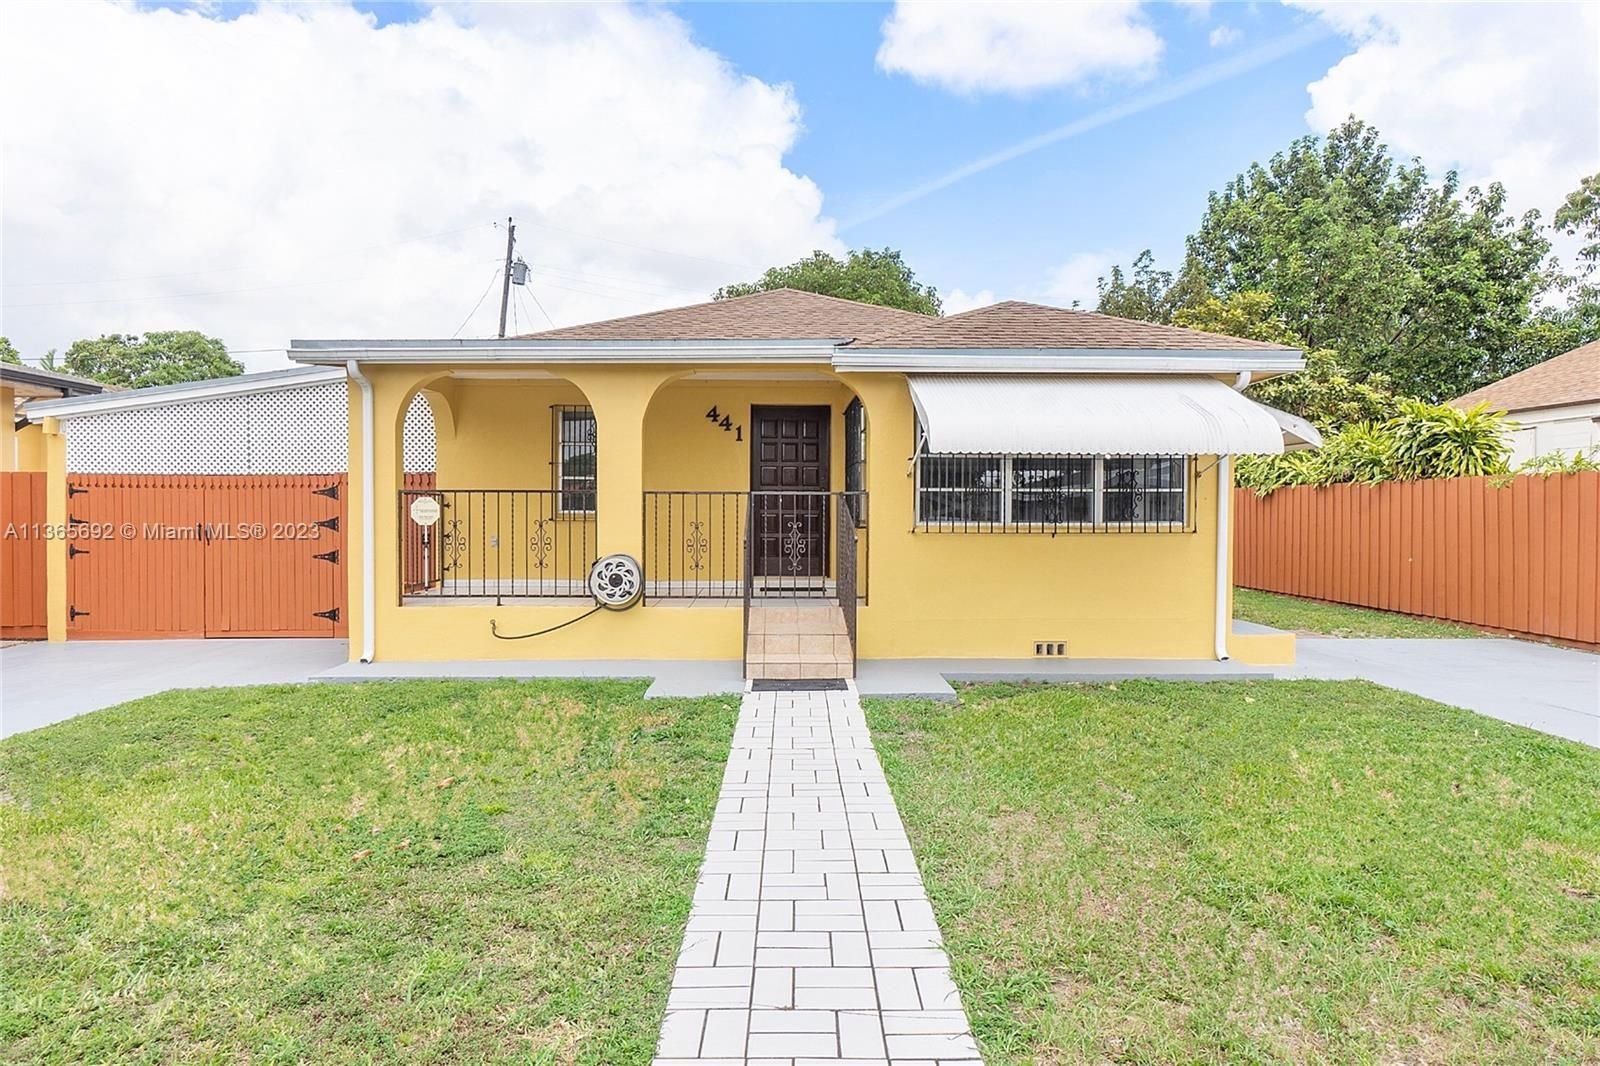 Real estate property located at 441 32nd Pl, Miami-Dade County, Miami, FL